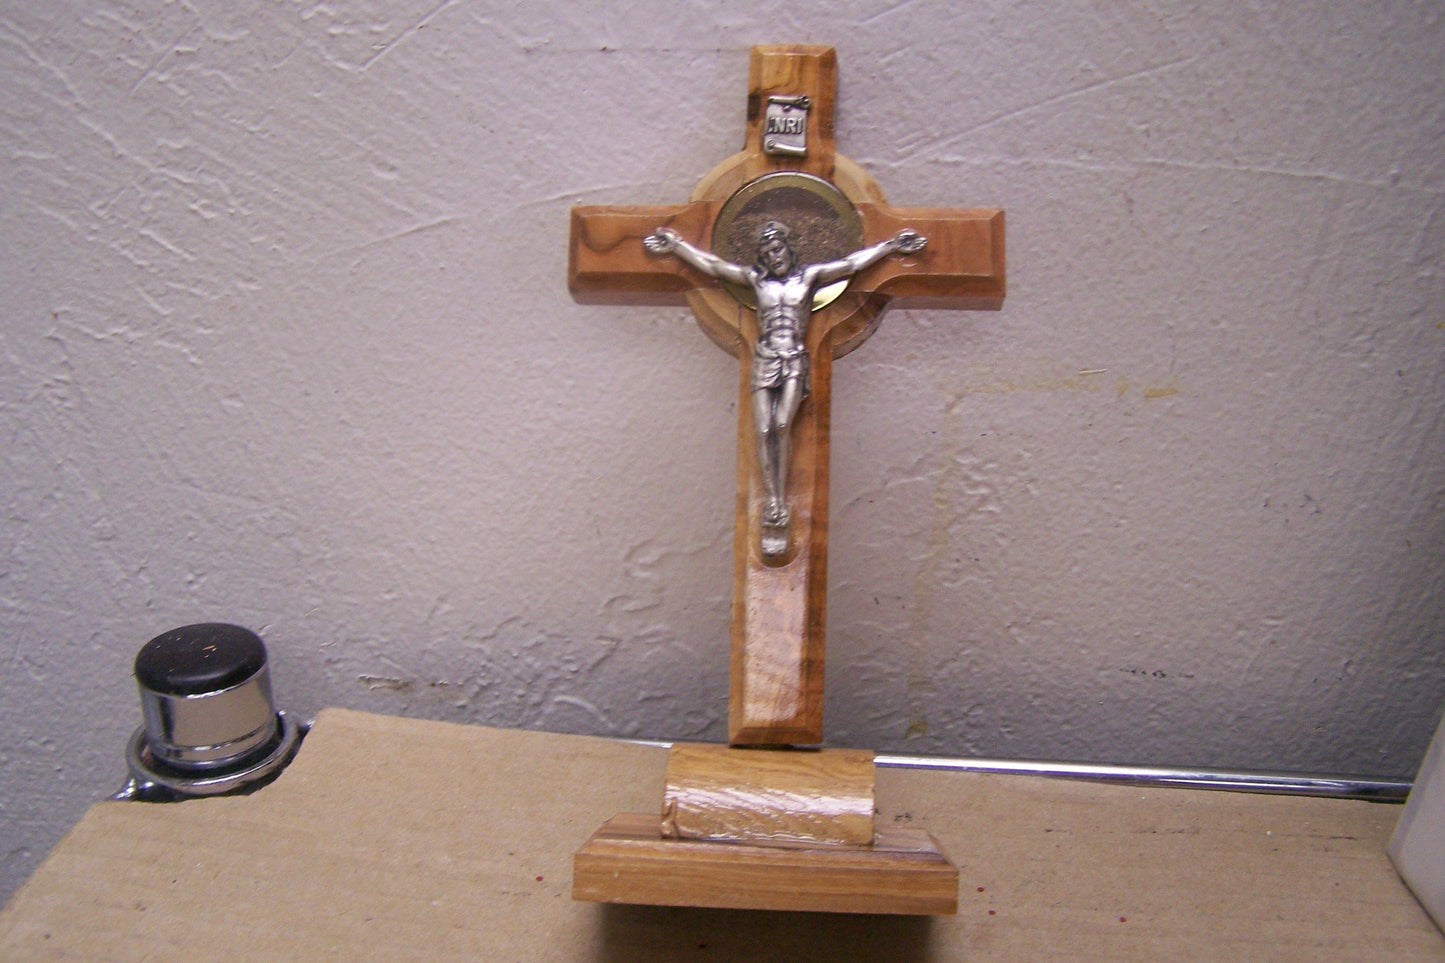 Holy Land Olive Wood Stand-up Cross with Holy Dirt Reliquary - Jerusalem